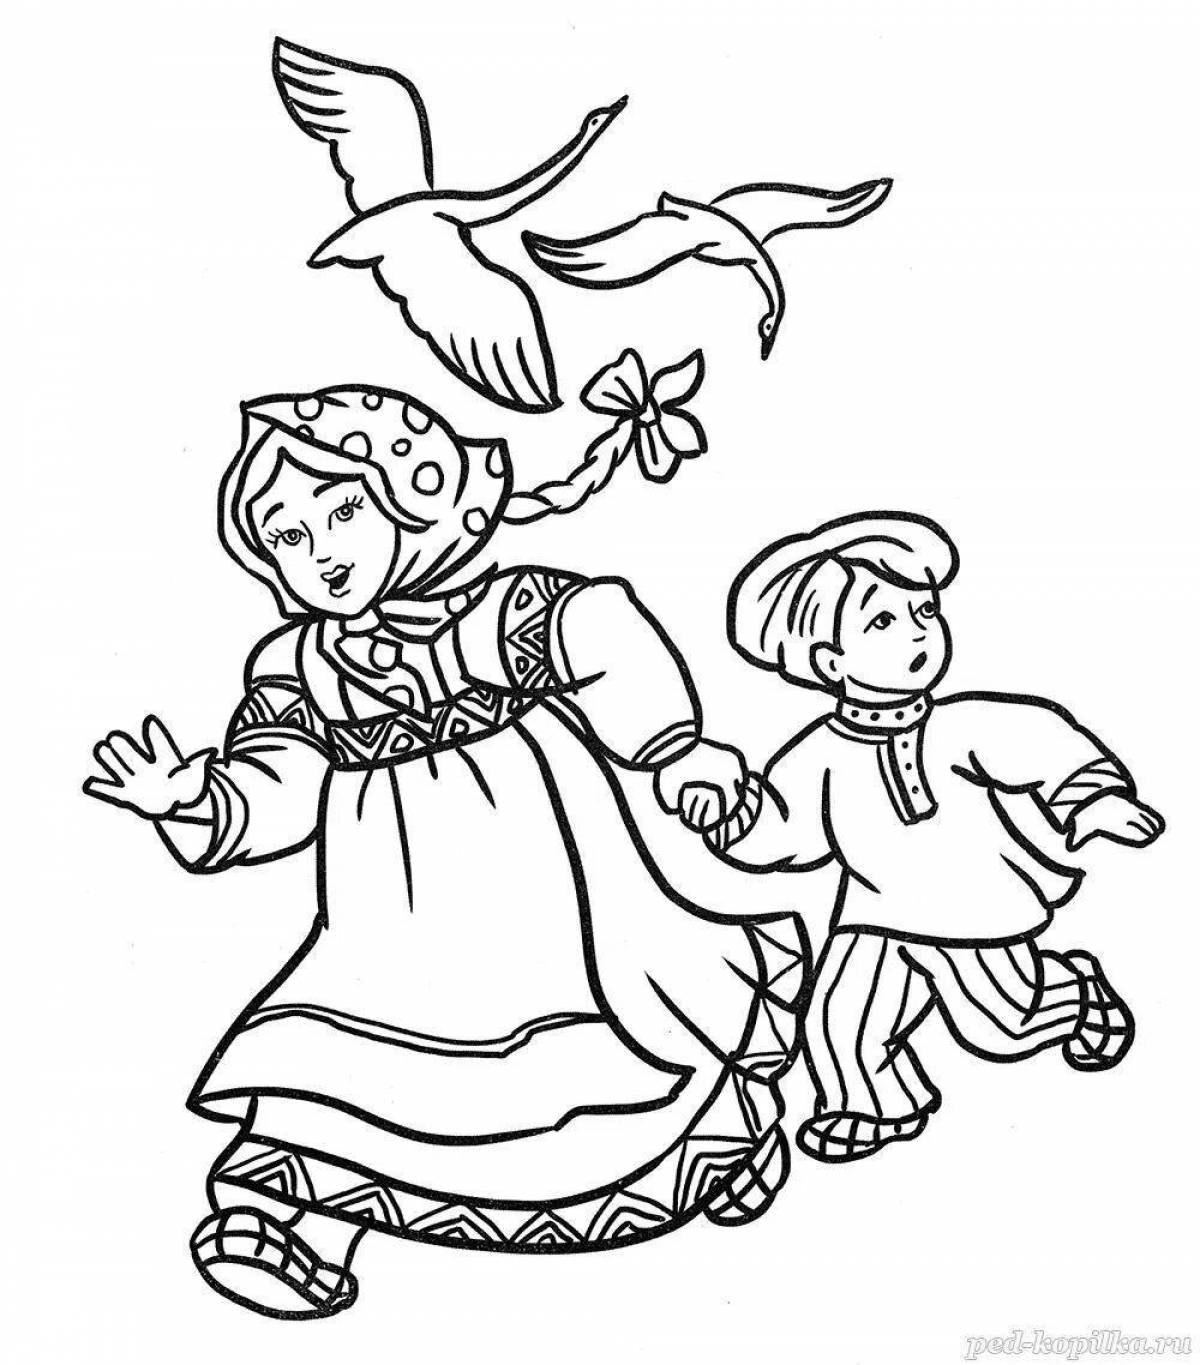 Fabulous swan geese coloring page